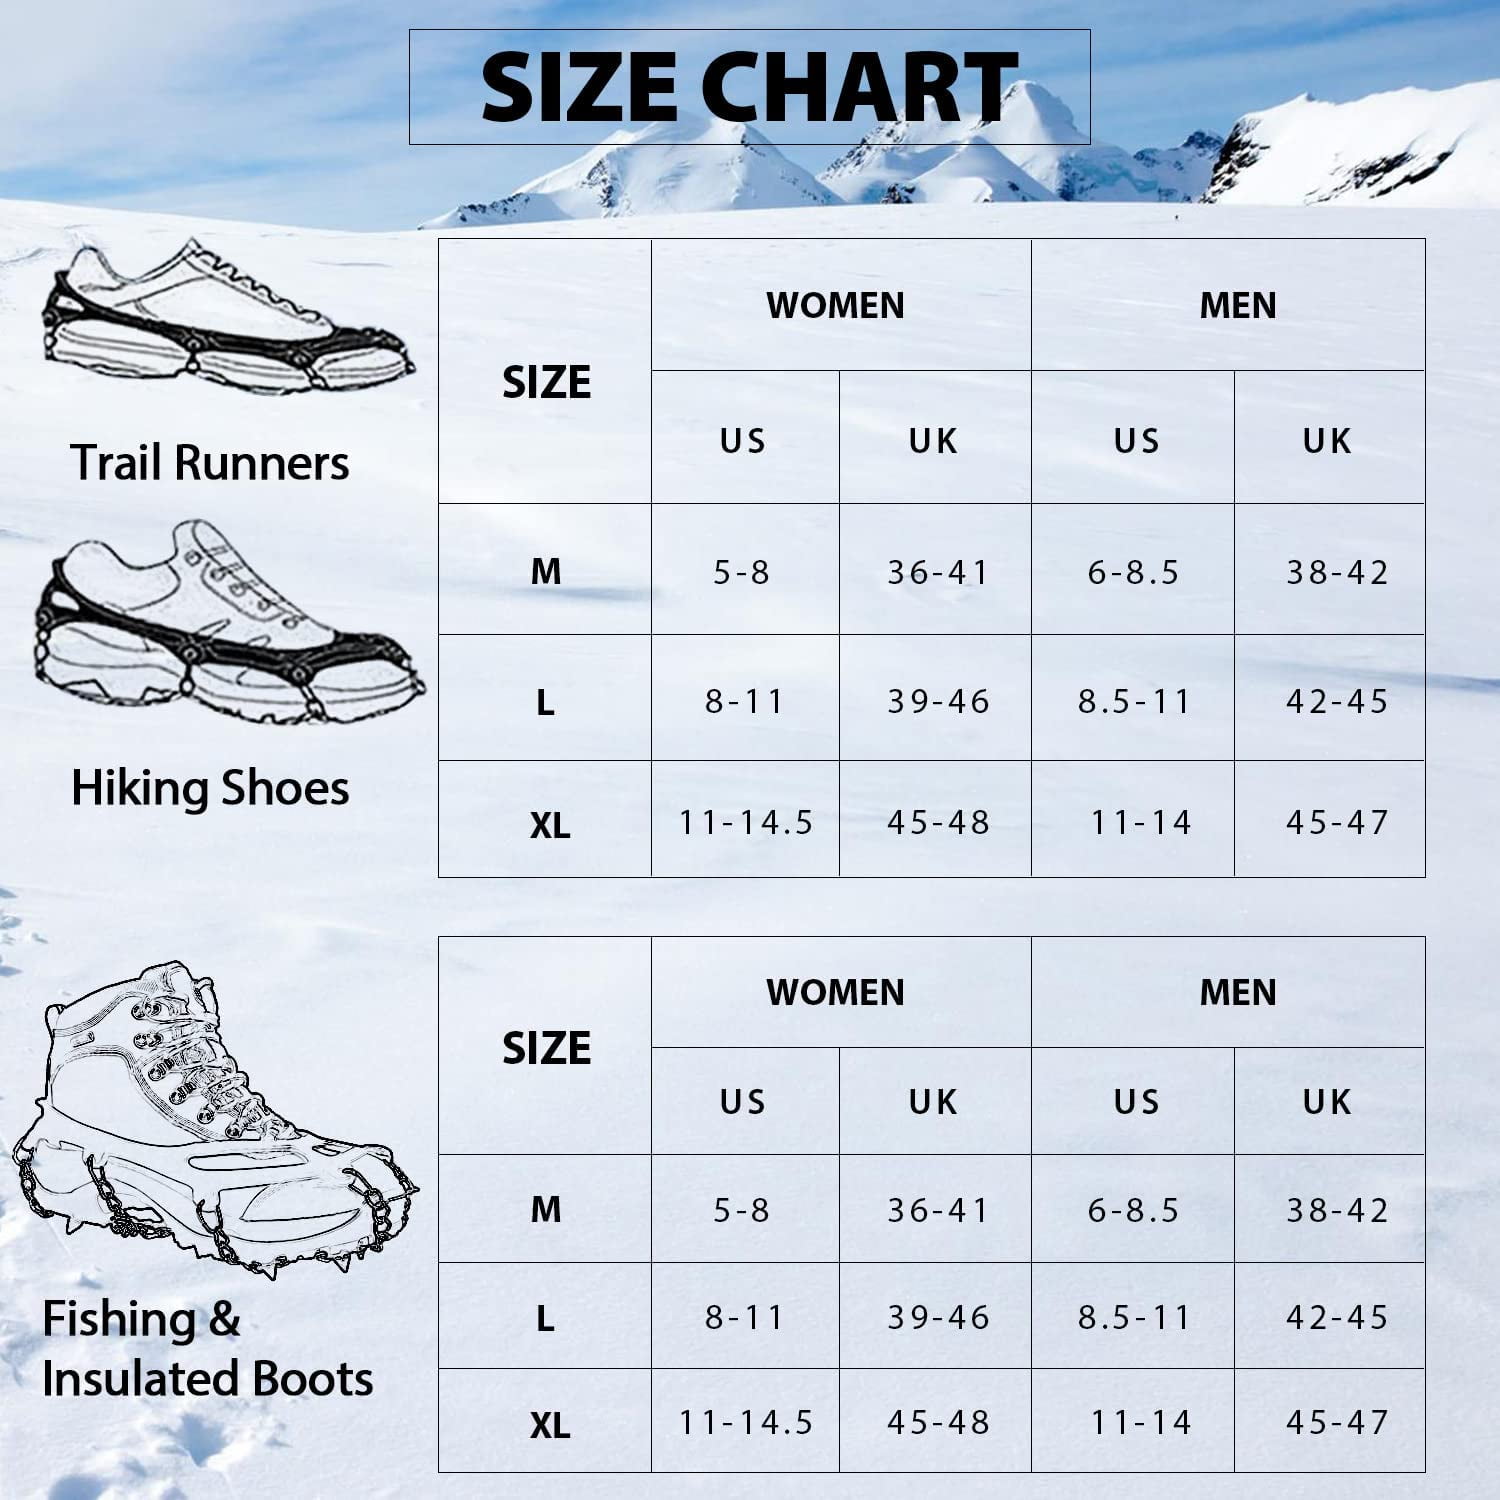 Cimkiz Crampons Ice Cleats Traction Snow Grips For Boots Shoes Women Men Kids Anti Slip 19 Stainless Steel Spikes Safe Protect For Hiking Fishing Wal